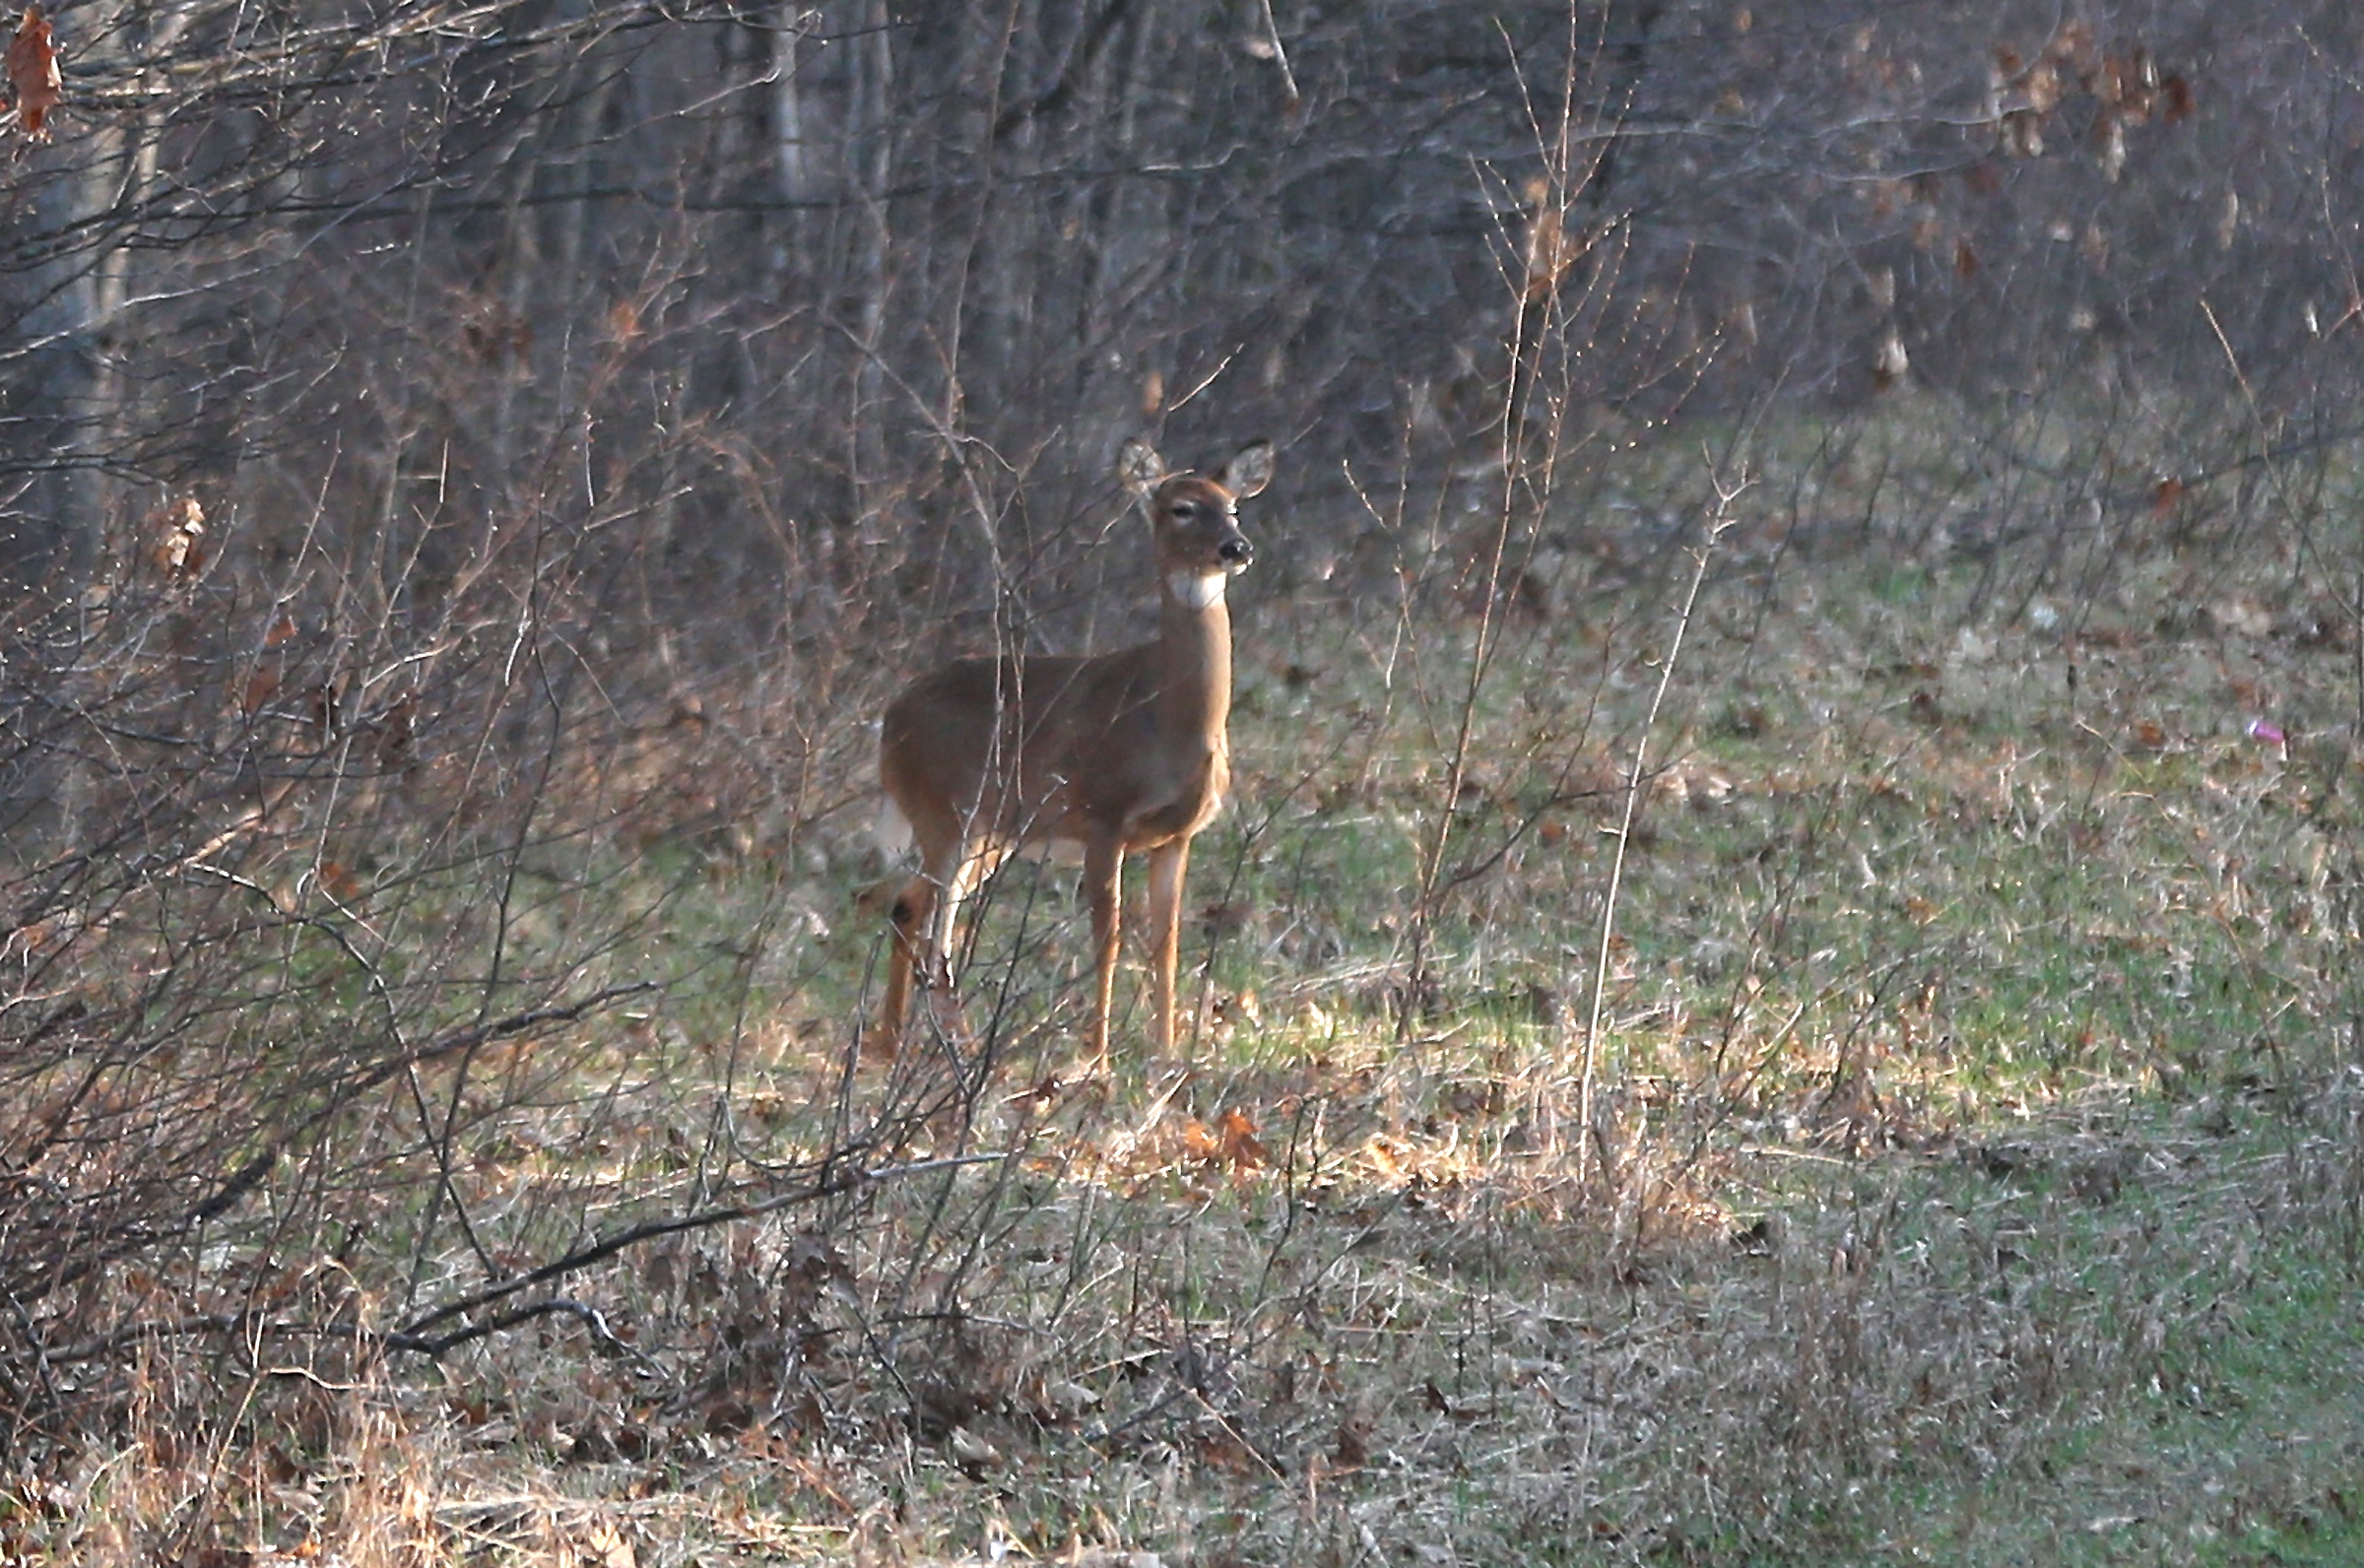 Looking To Slow CWD, DNR Board OKs Fencing Requirements For Deer Farms